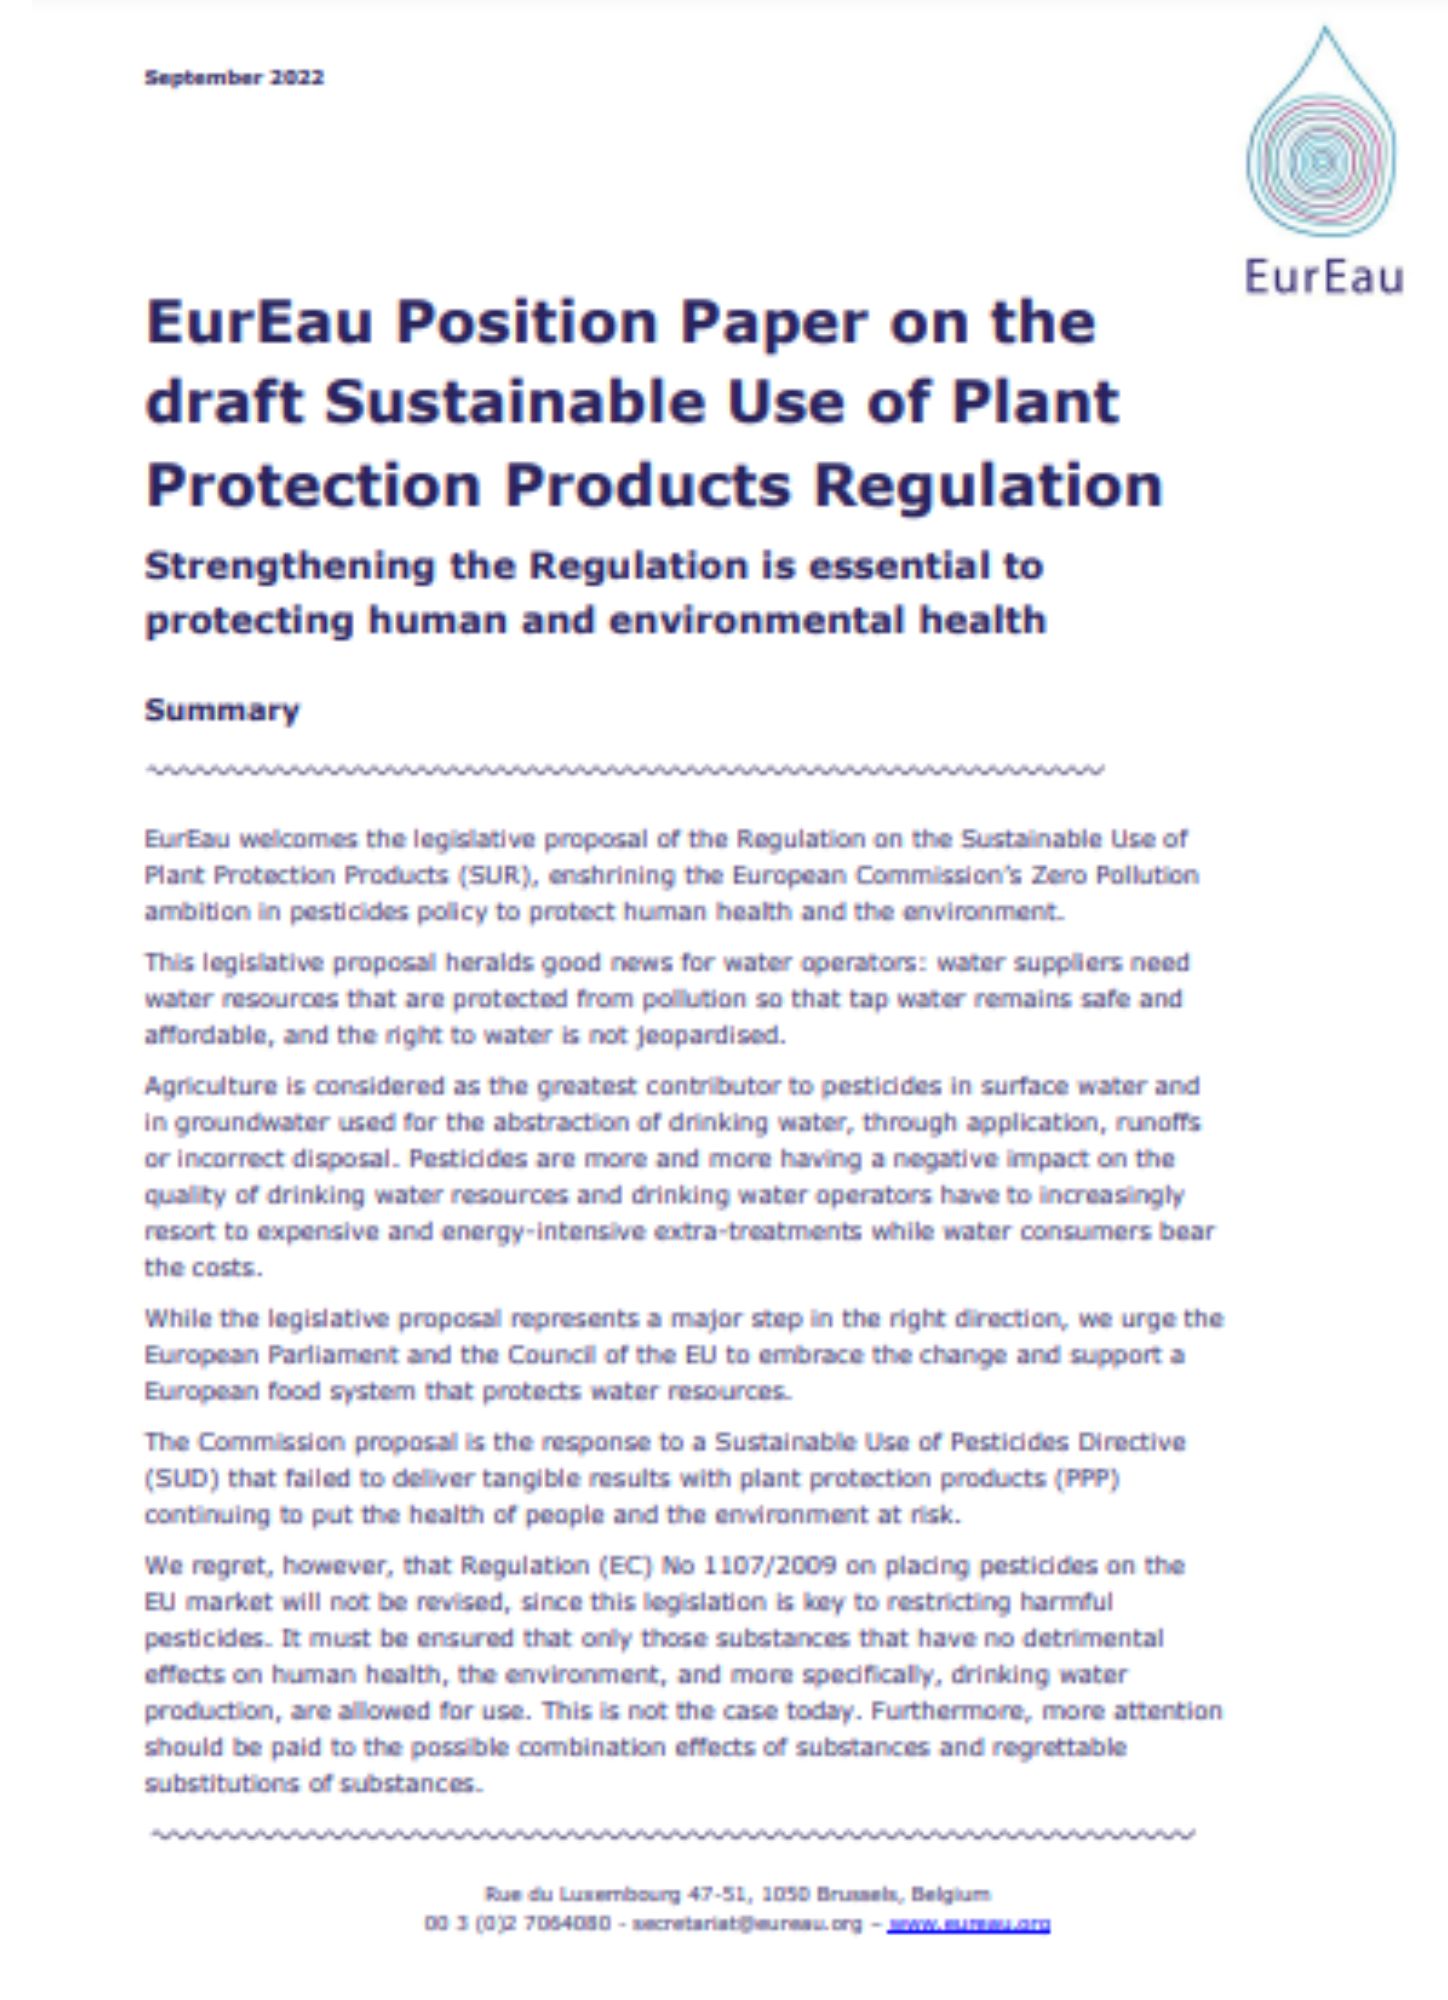 Position Paper on the Sustainable Use of Pesticides Regulation